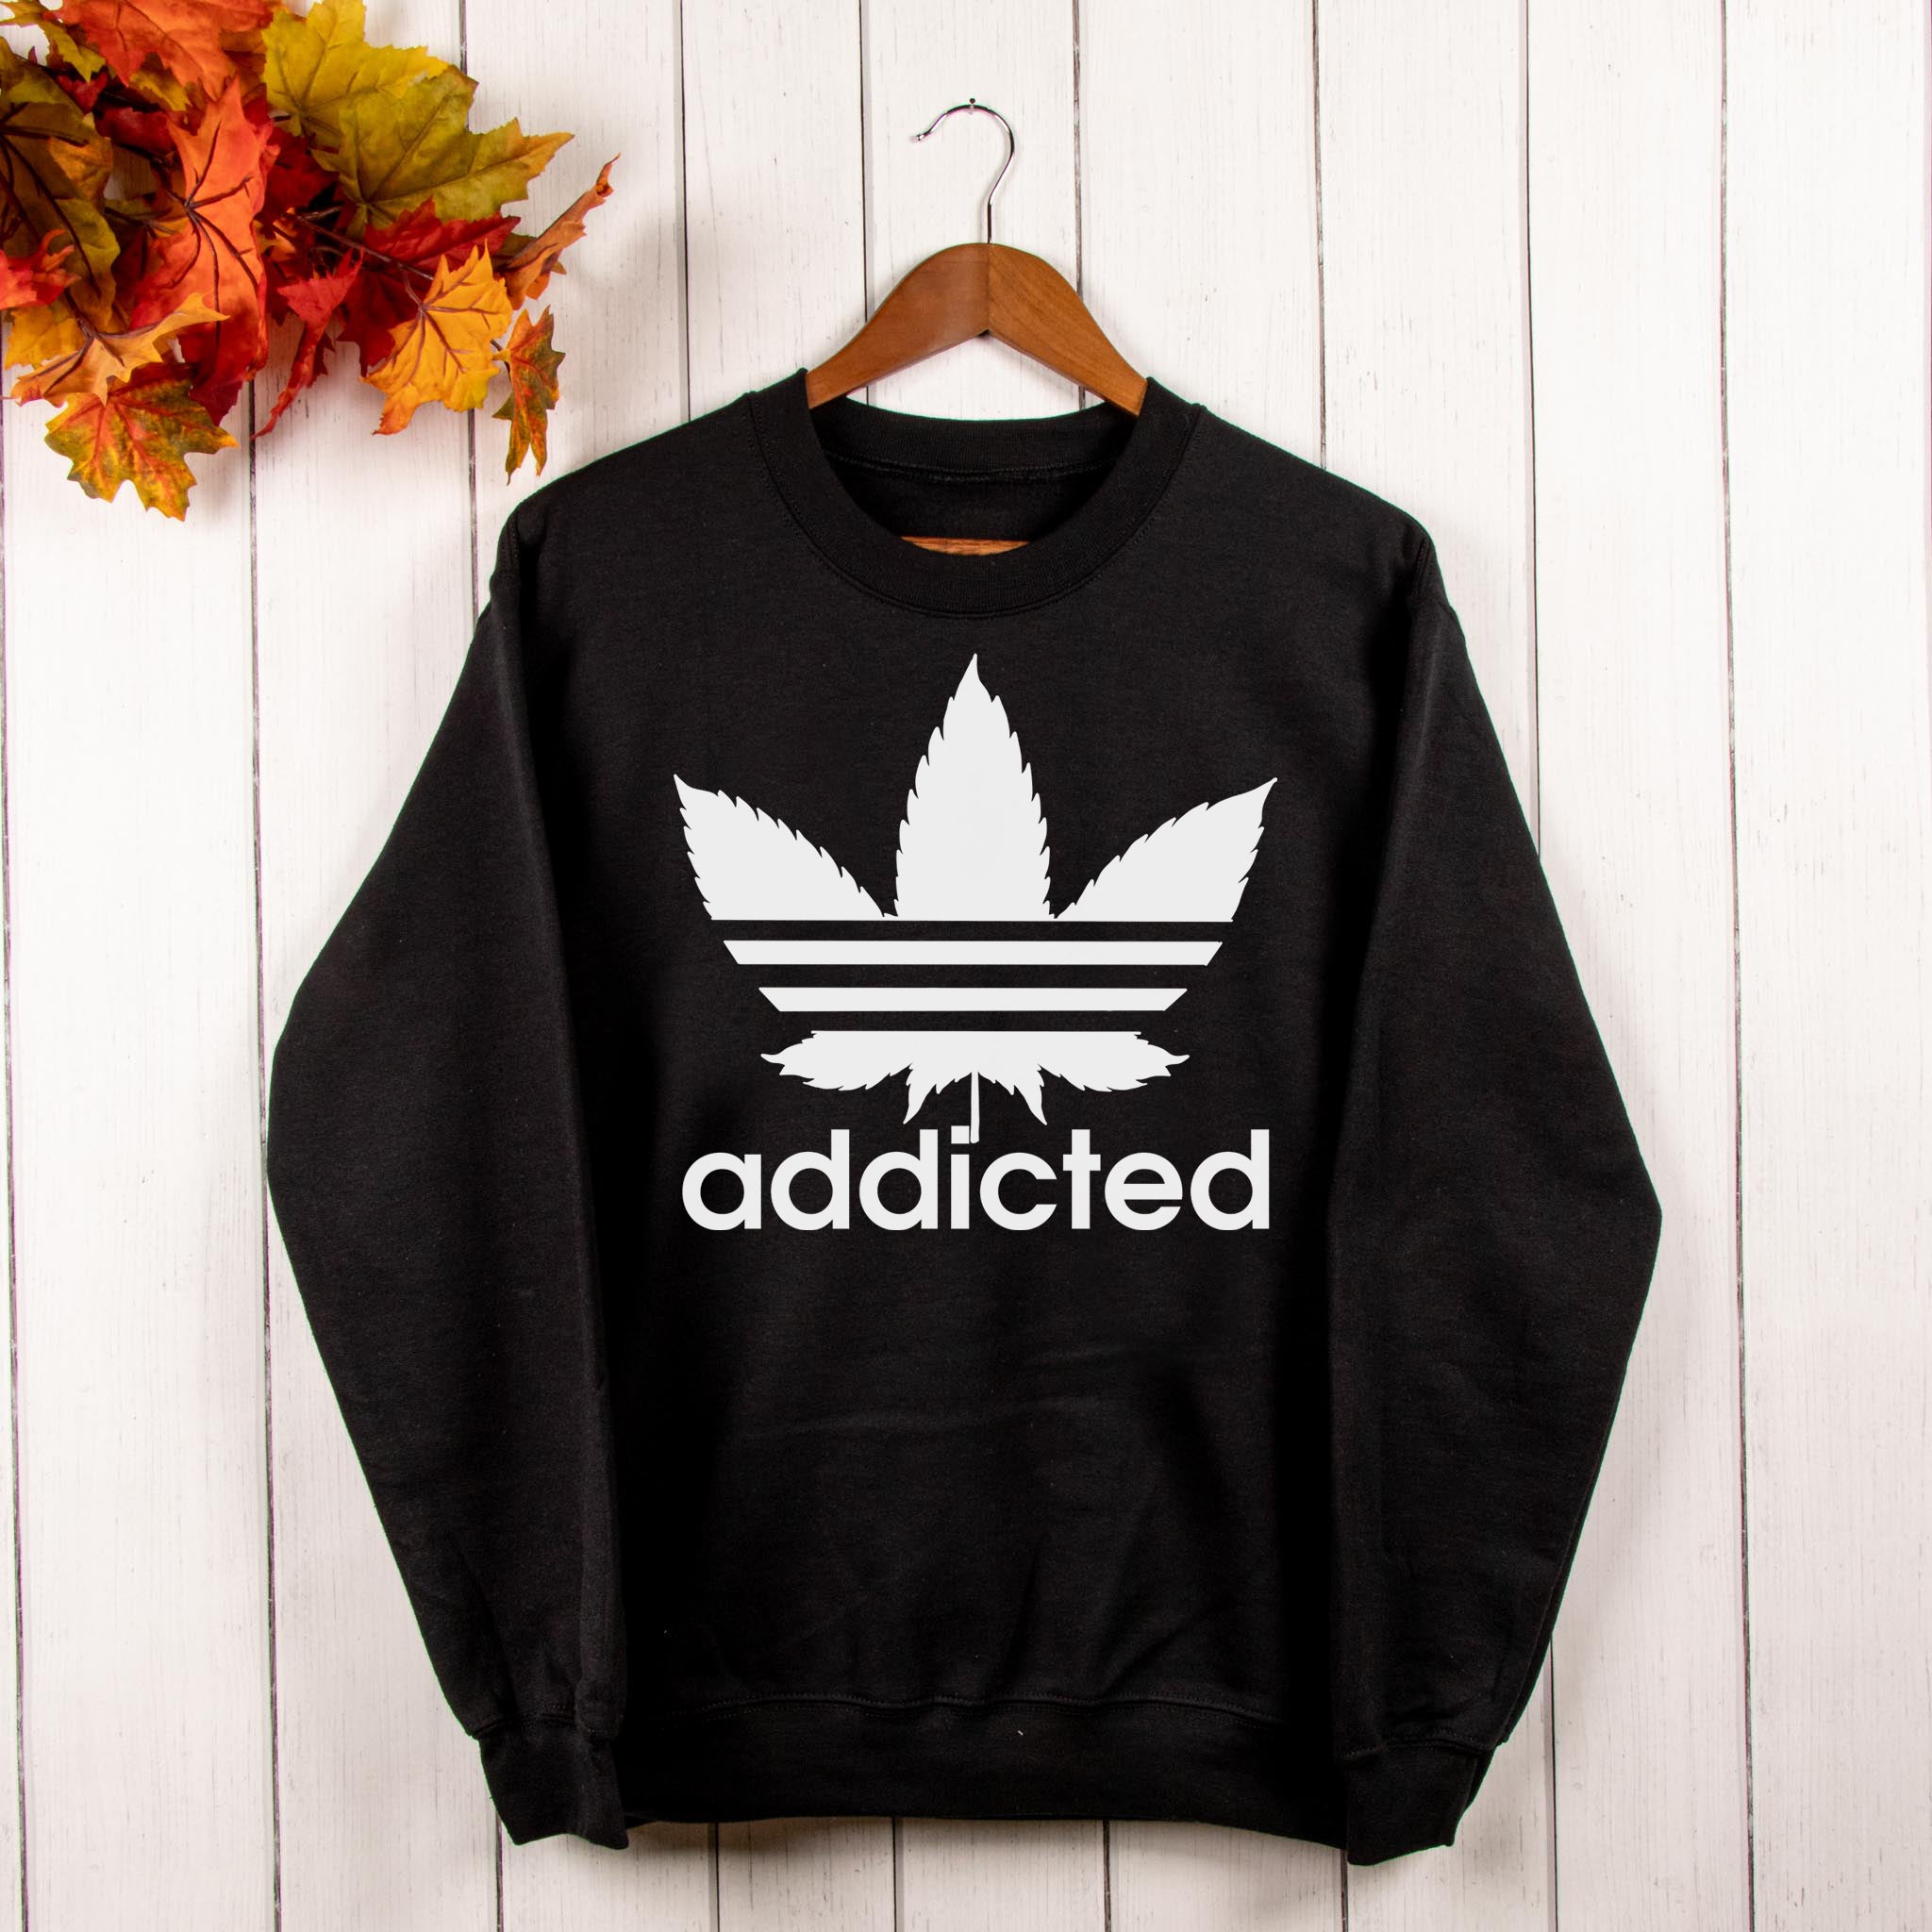 black sweater with a weed leaf saying addicted - HighCiti